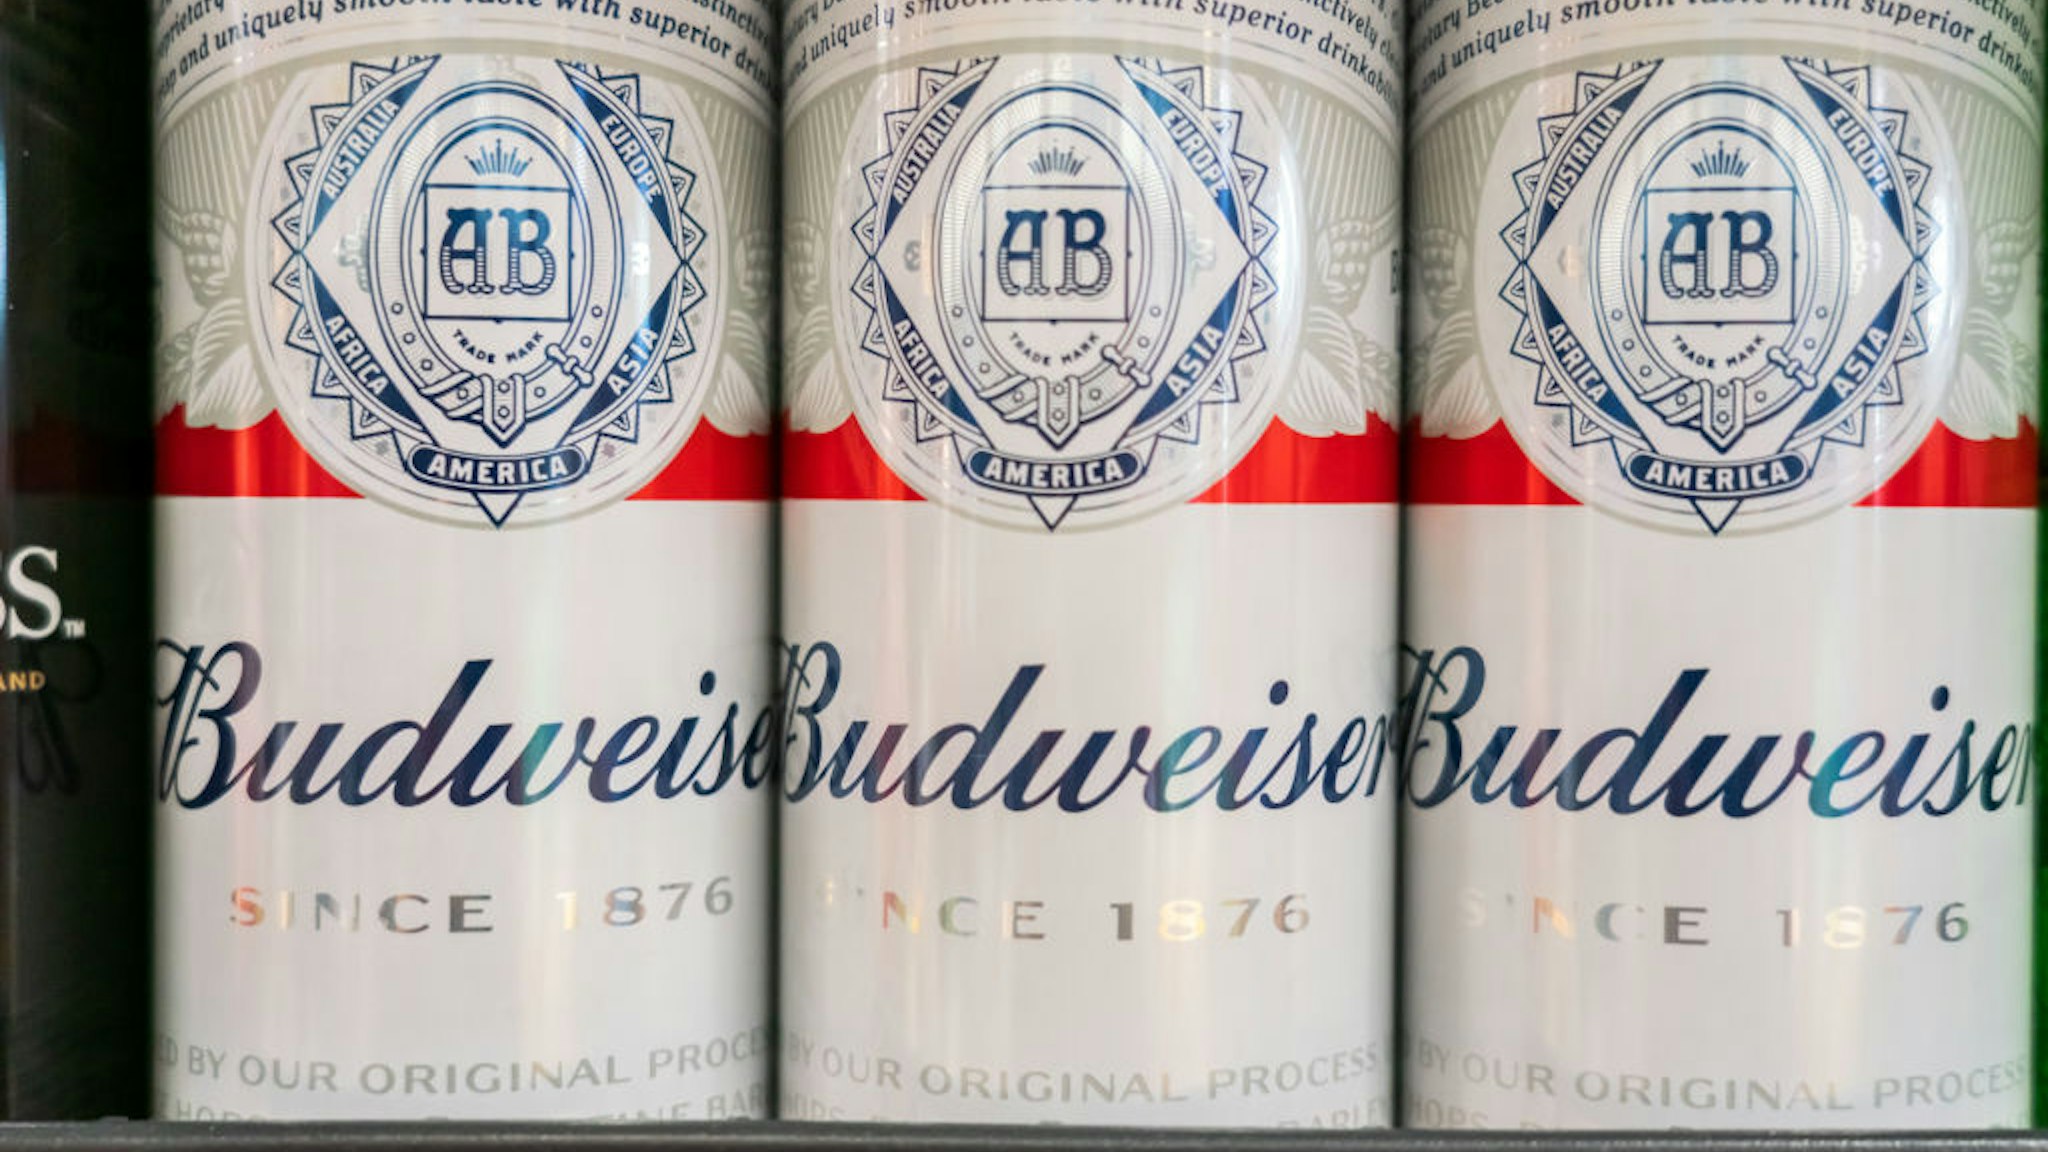 Cans of Budweiser beer seen at a supermarket.